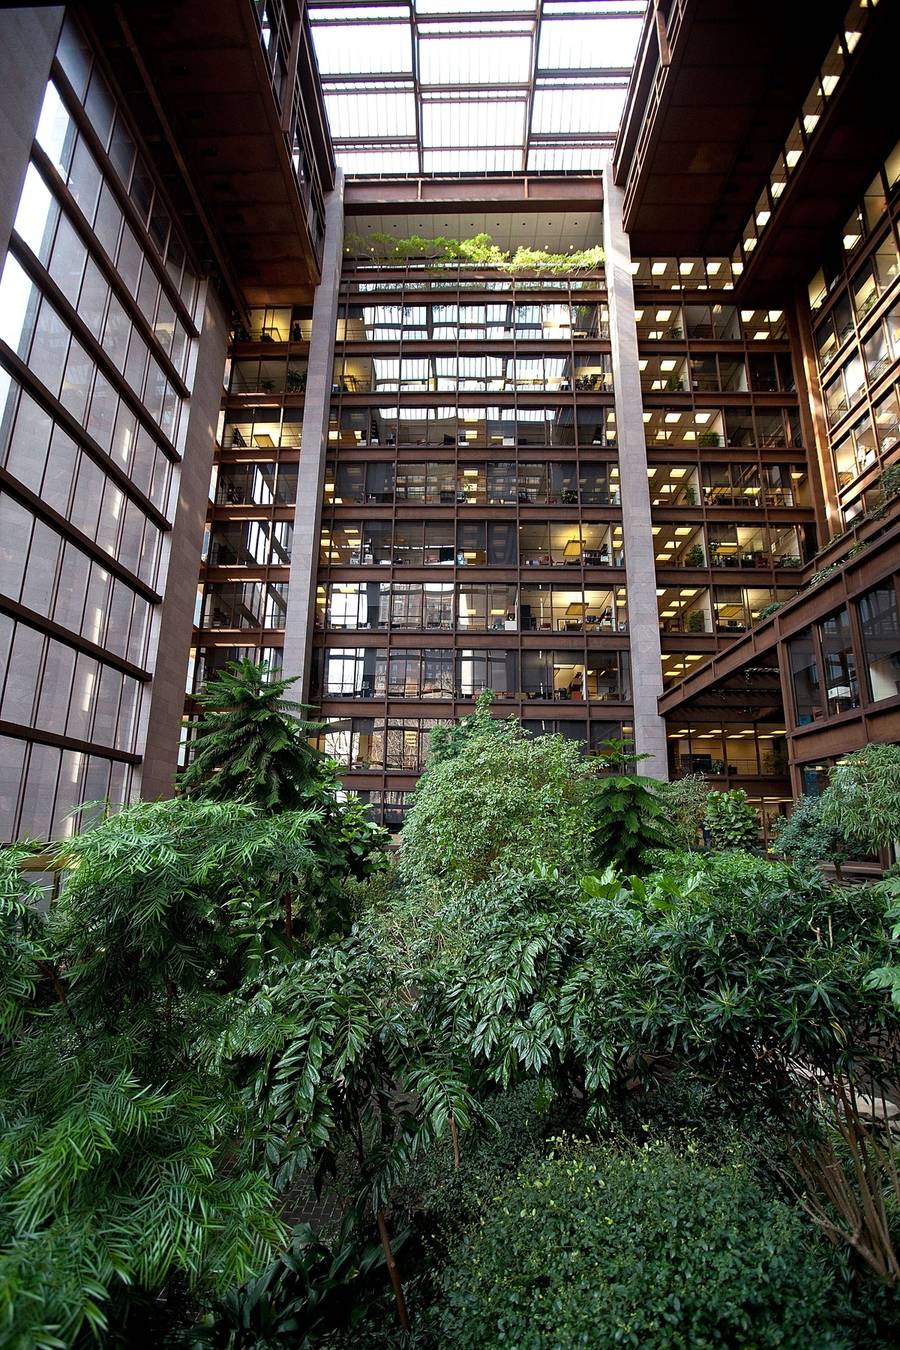 The Ford Foundation Building interior in New York City